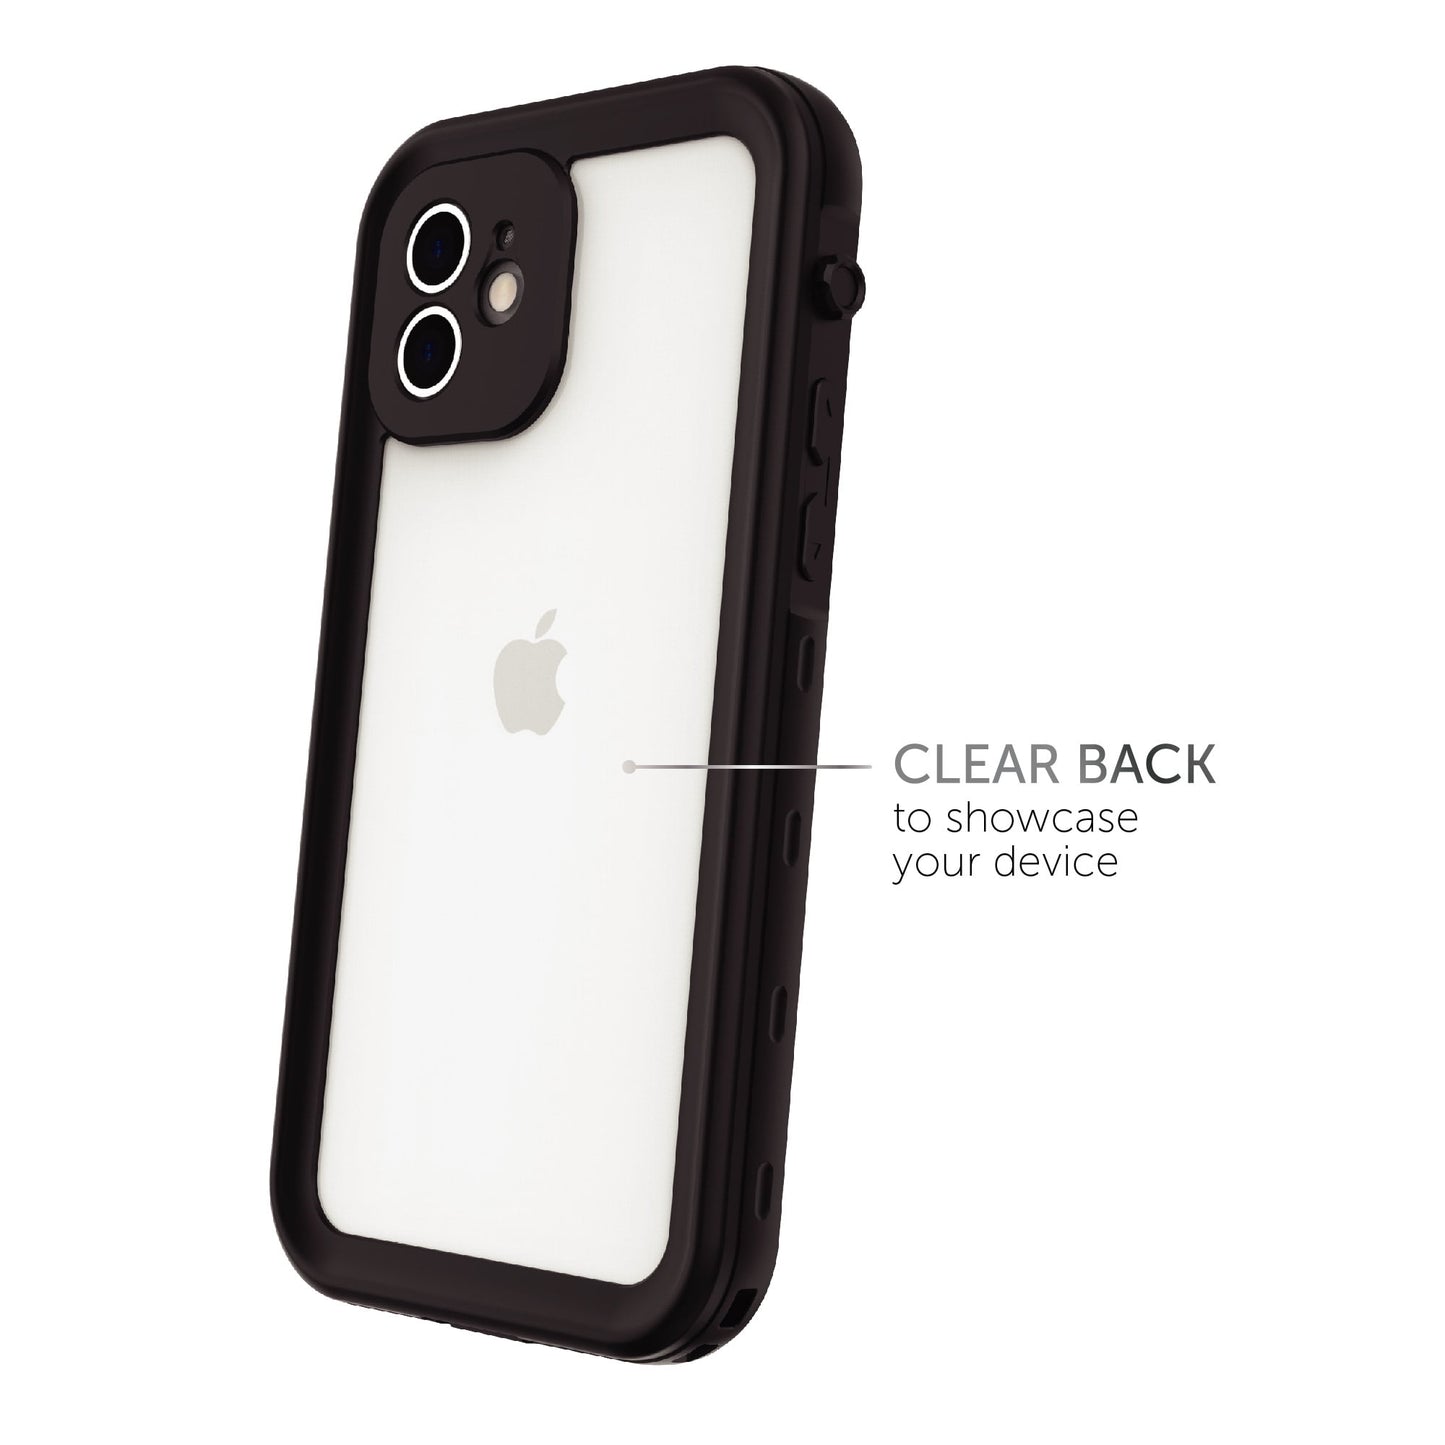 Body Glove Tidal Waterproof Phone Case for iPhone 12 - Black/Clear